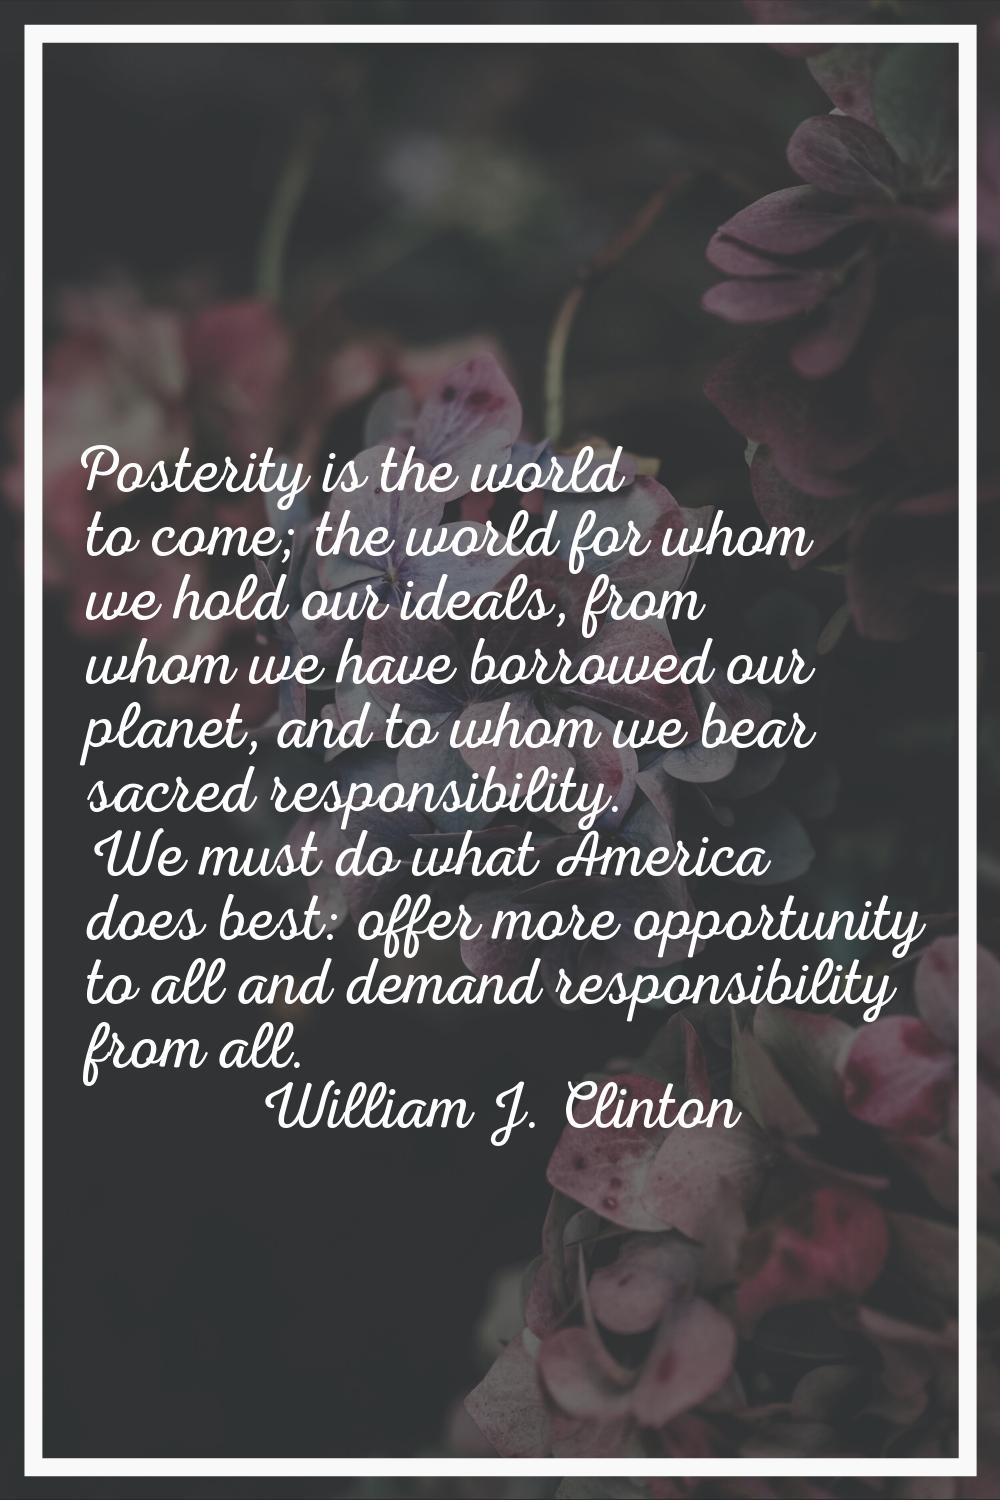 Posterity is the world to come; the world for whom we hold our ideals, from whom we have borrowed o